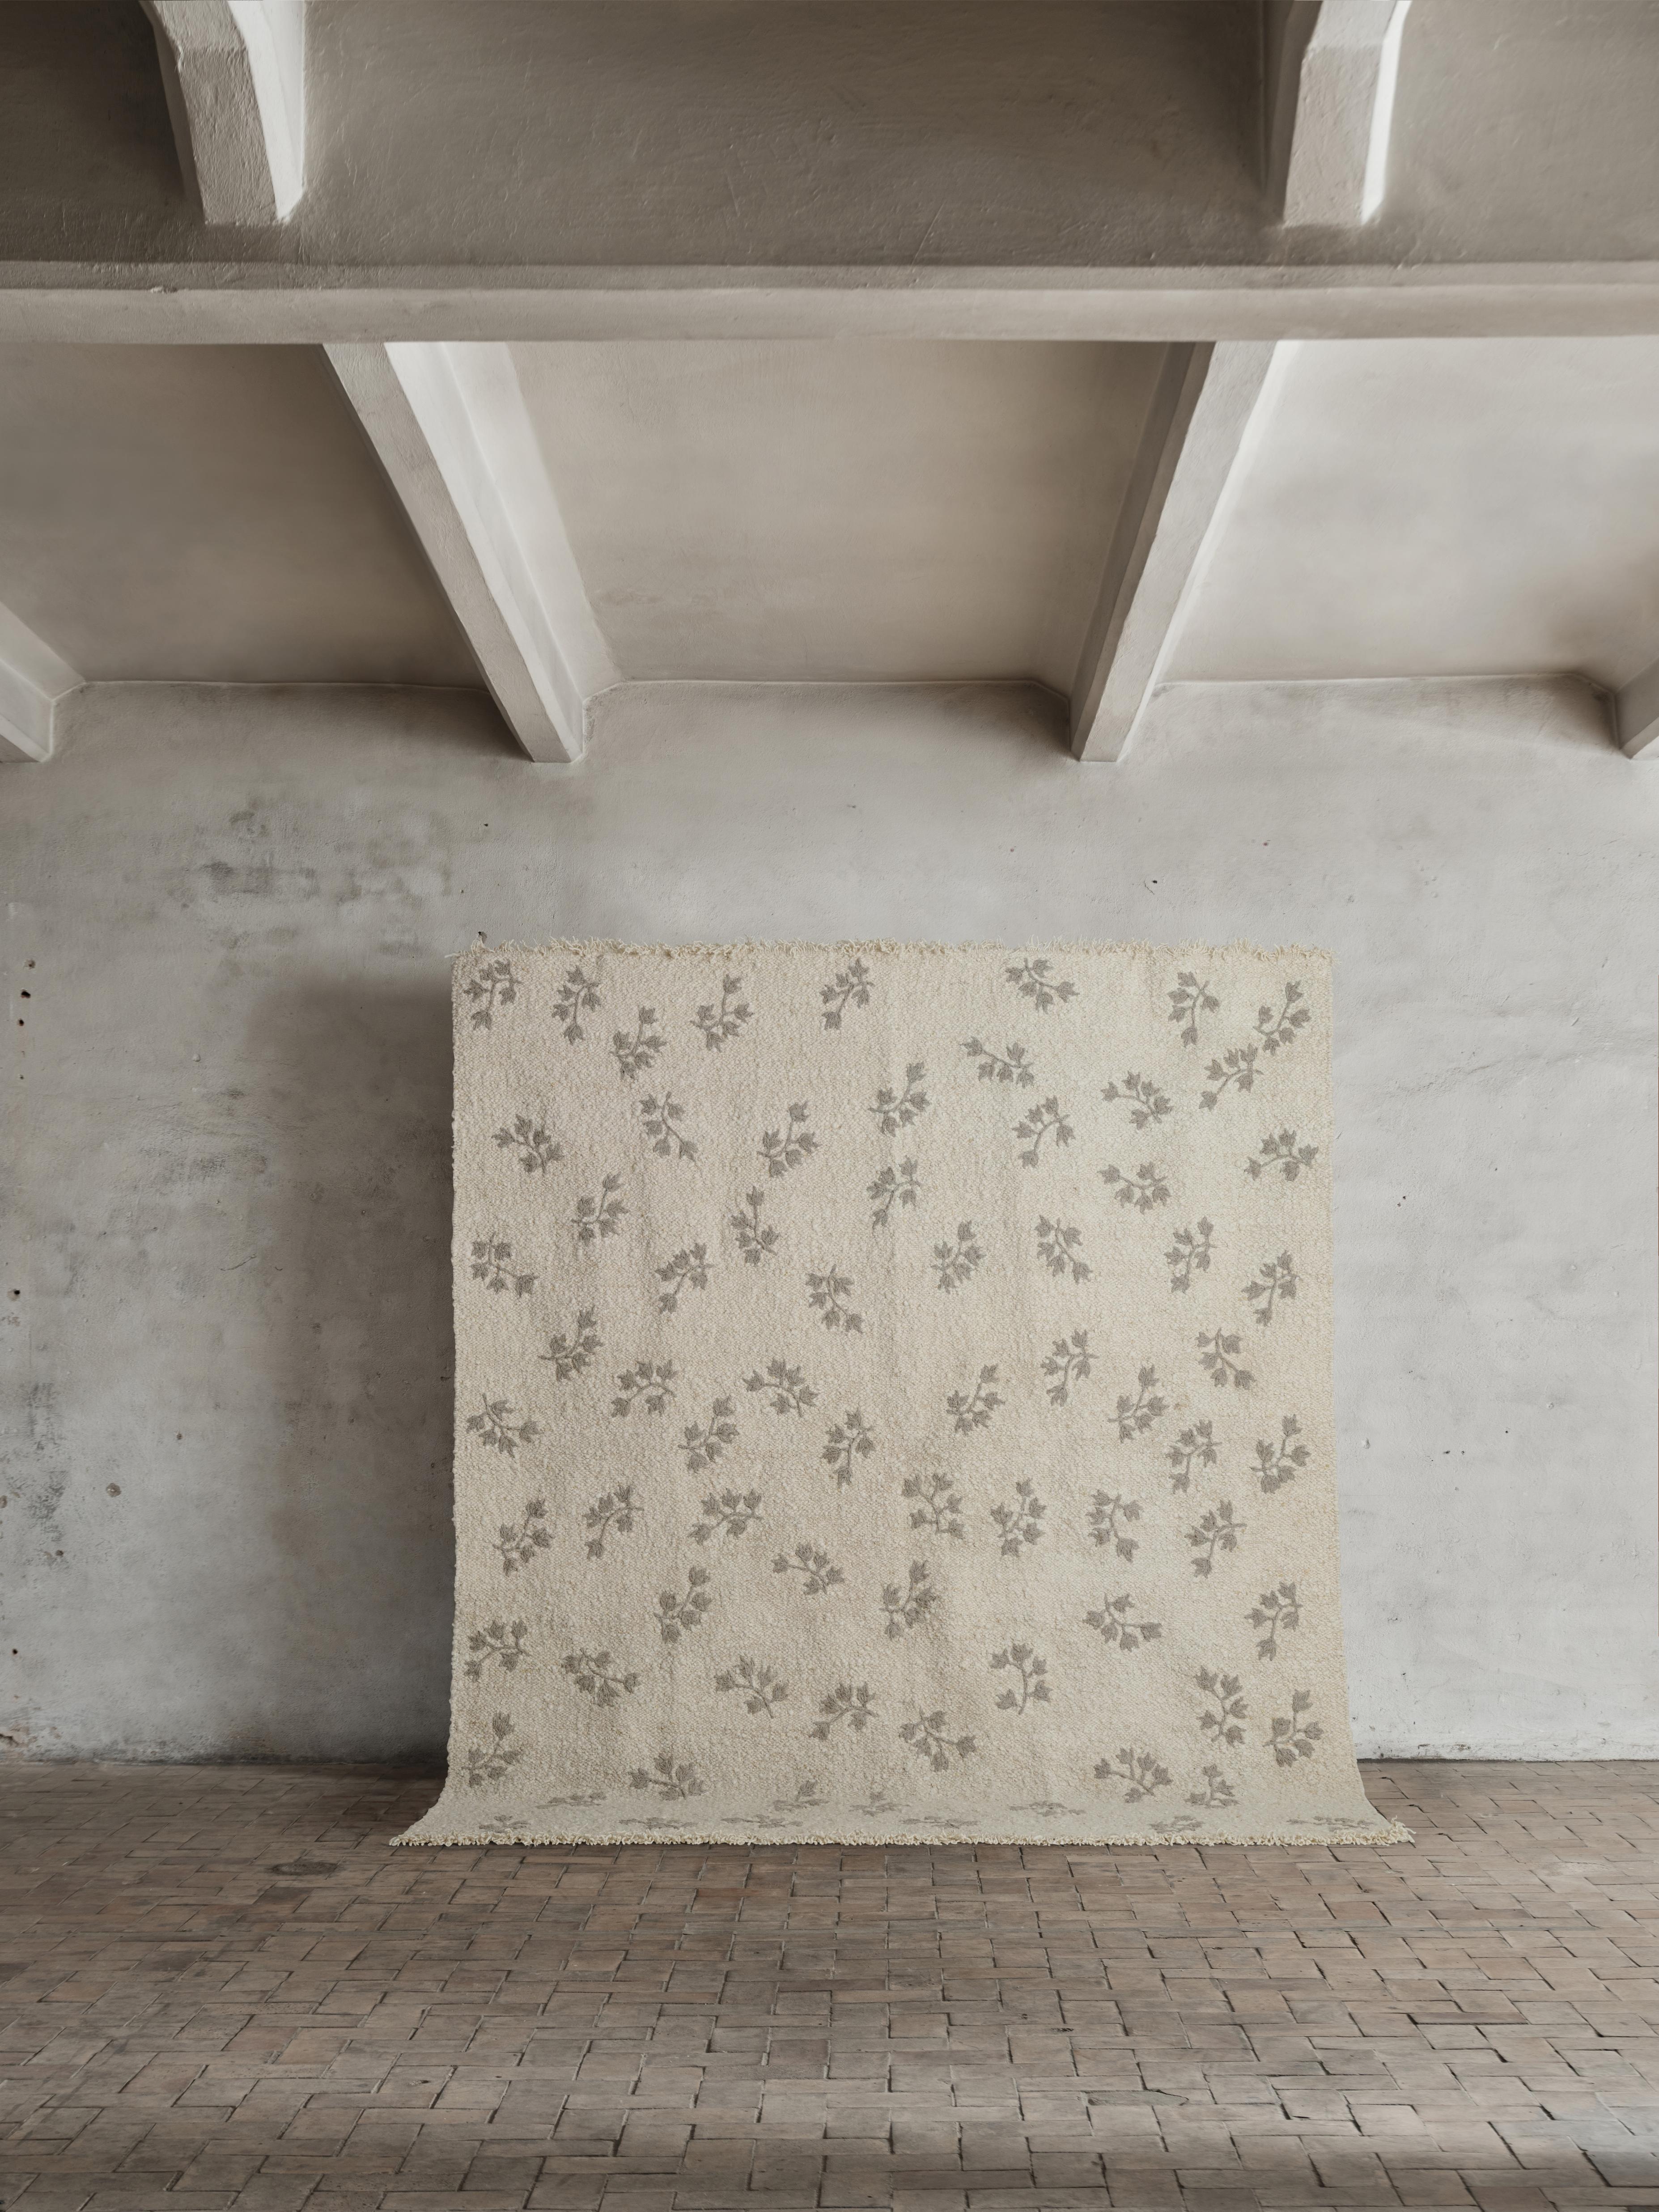 No.16 Rug by Cappelen Dimyr
Dimensions: D 230 x H 280 cm
Materials: 85% wool, 15% cotton

Rug no.16 is made in natural New zealand wool with handspun slub yarn, creating a irregular foundation. No.16 is designed in a chalky off-white shade with a